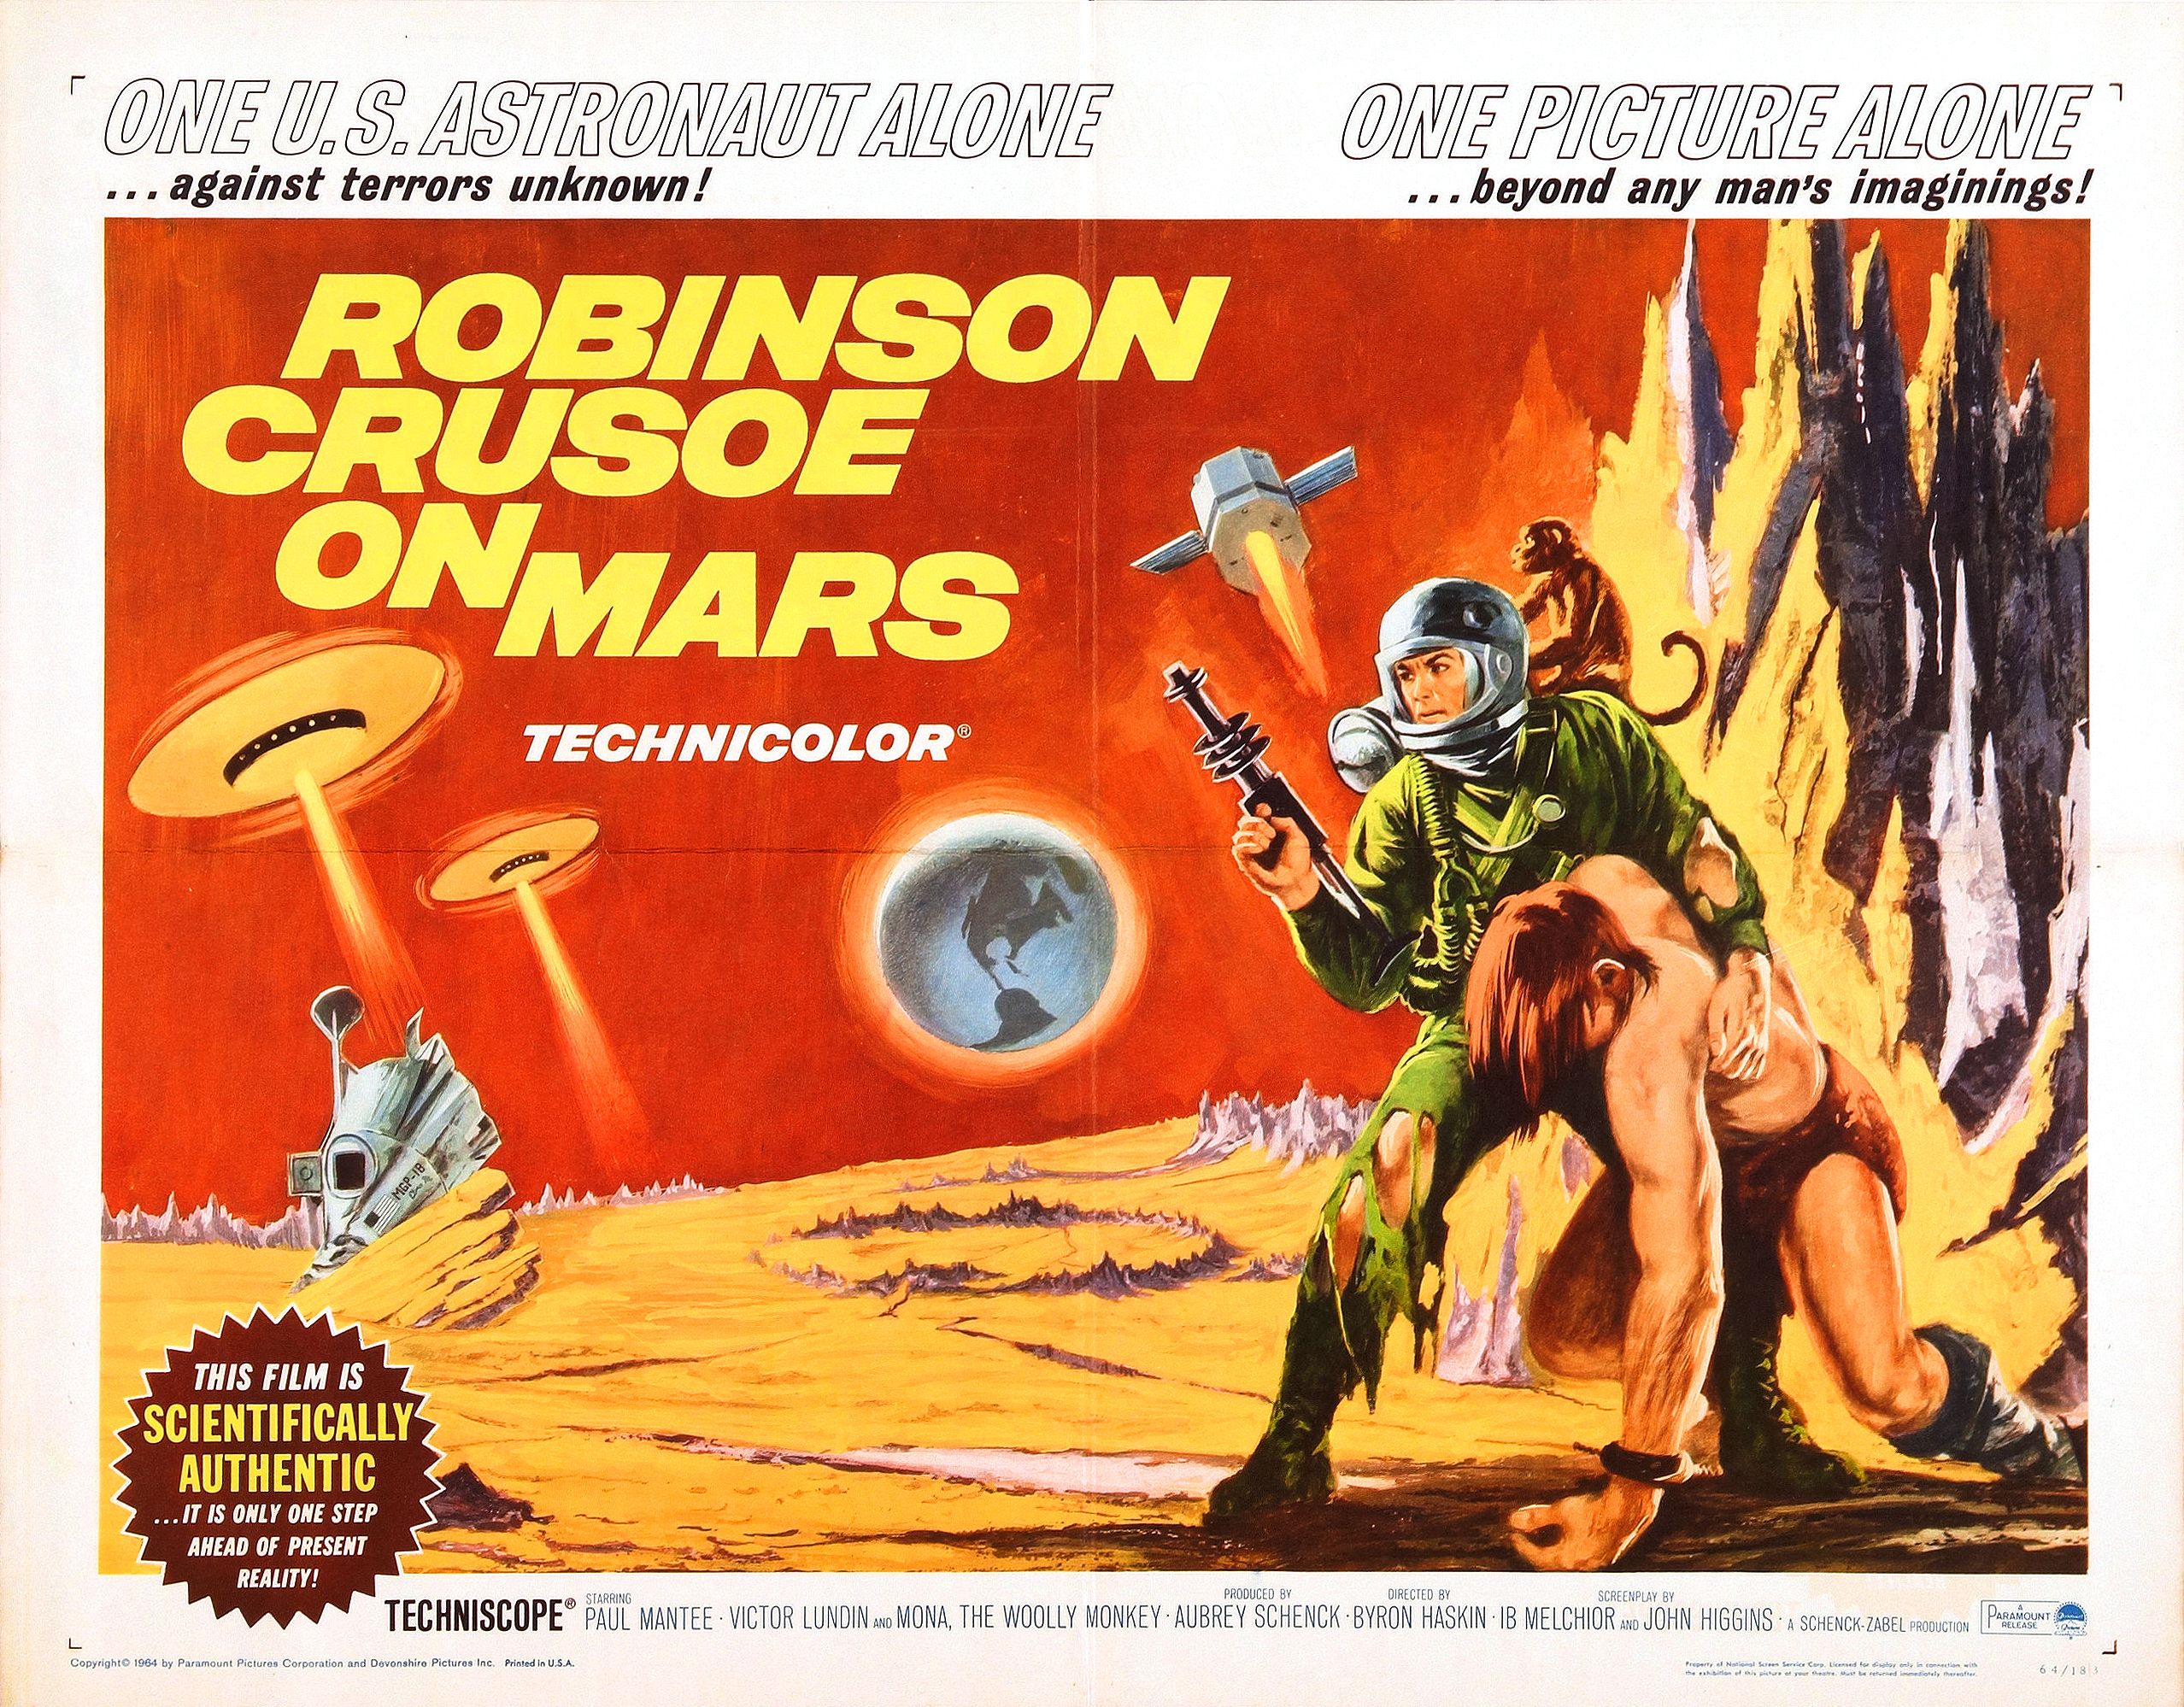 robinson crusoe on mars poster - "One U.S. Astronaut Alone One Picture Alone ... beyond any man's imaginings! ... against terrors unknown! Robinson Crusoe Onmars Technicolor This Film Is Scientifically Authentic It Is Only One Step Anad Of Present Reality